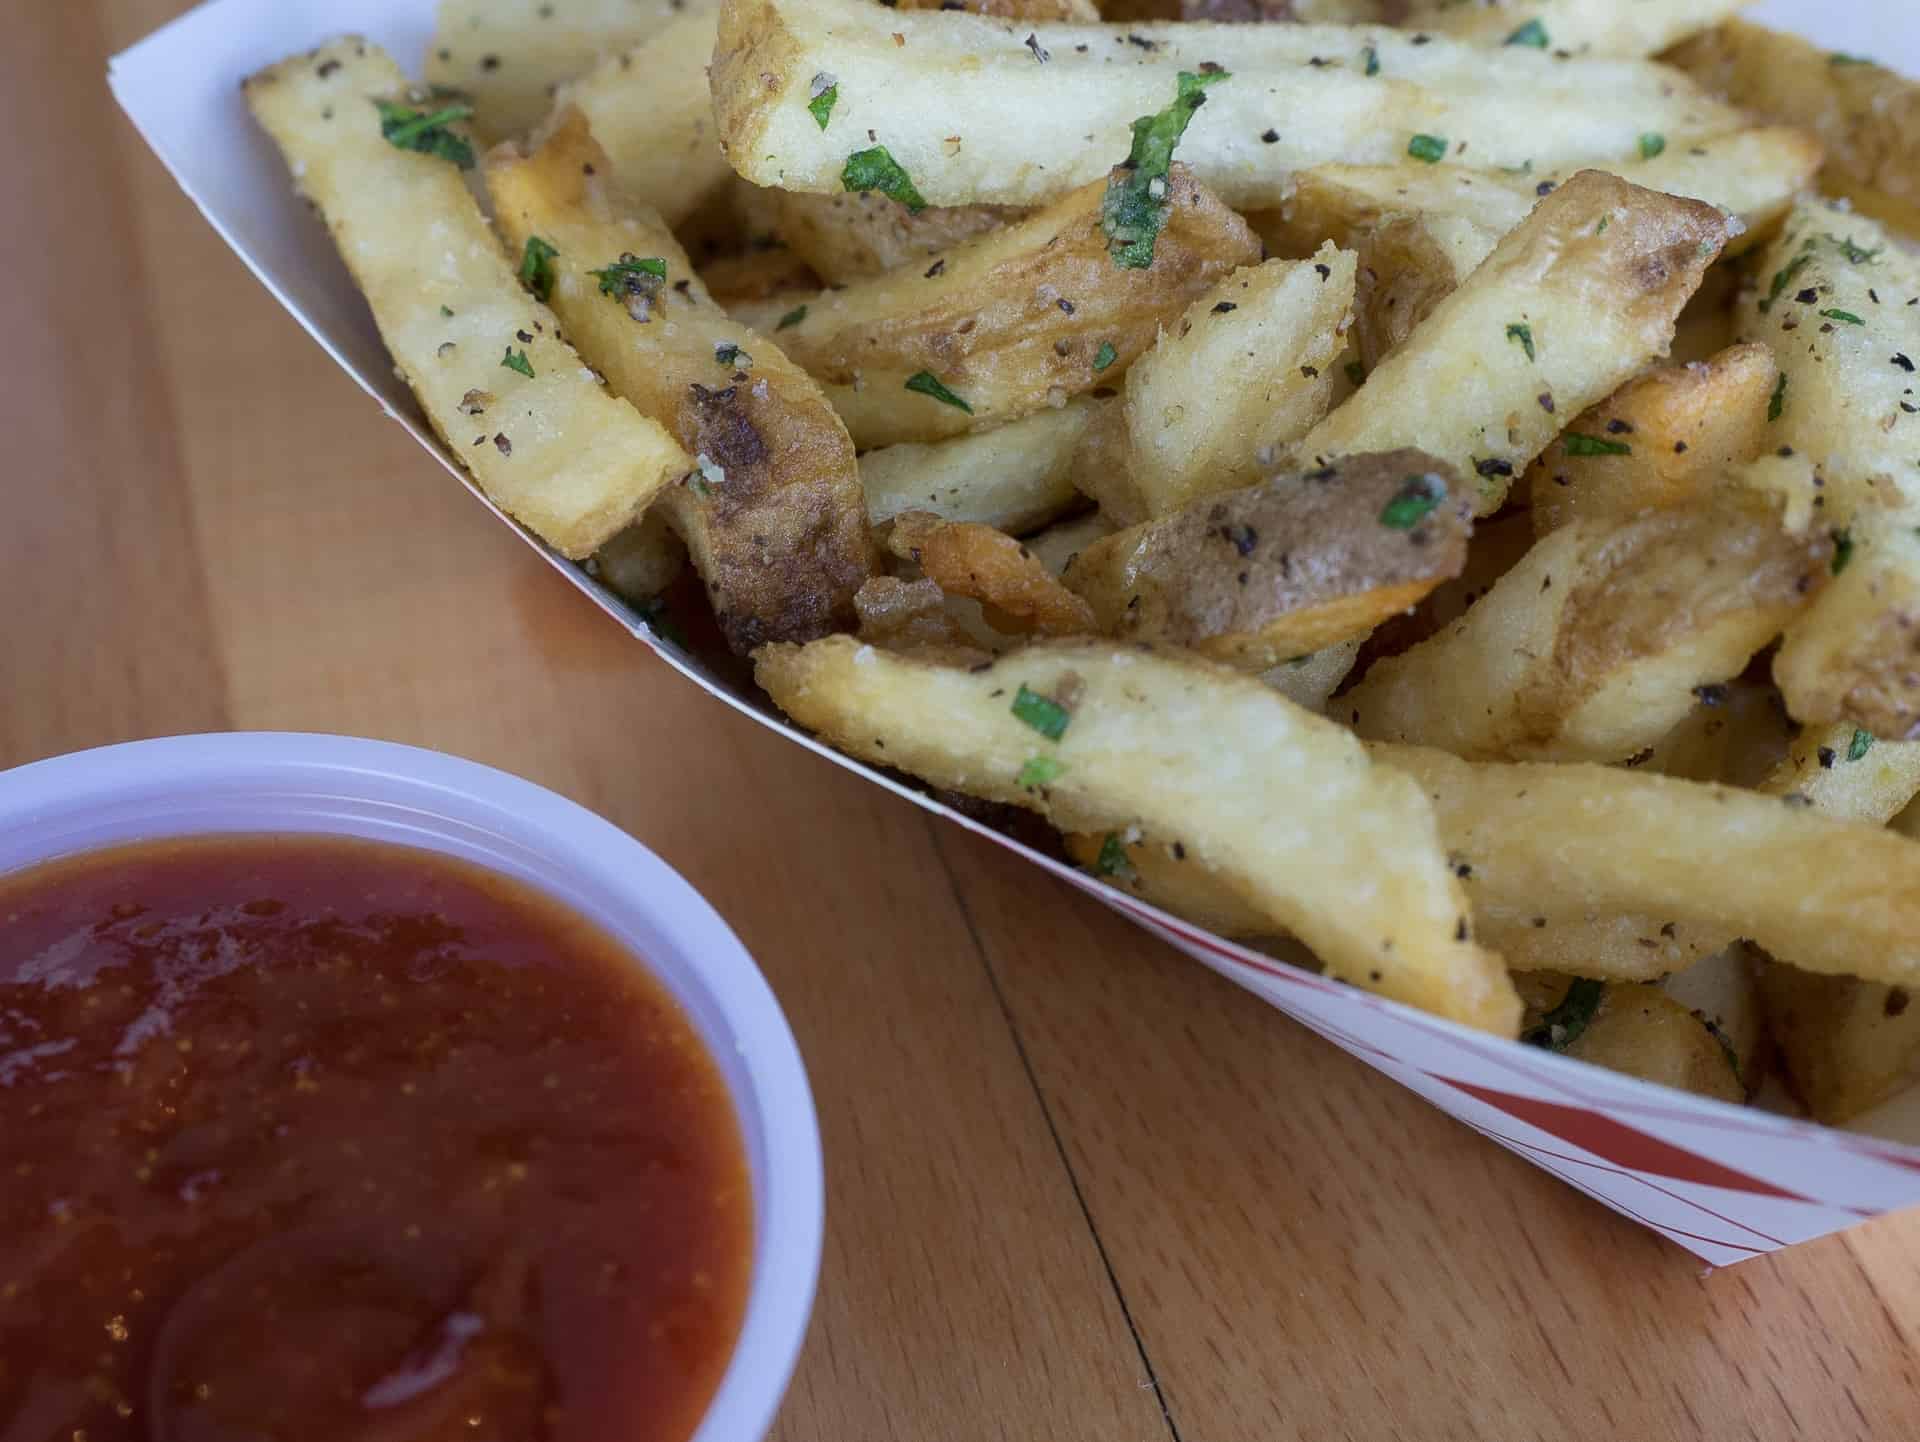 The Islander Coronado Twice cooked kennebec fries with curry ket